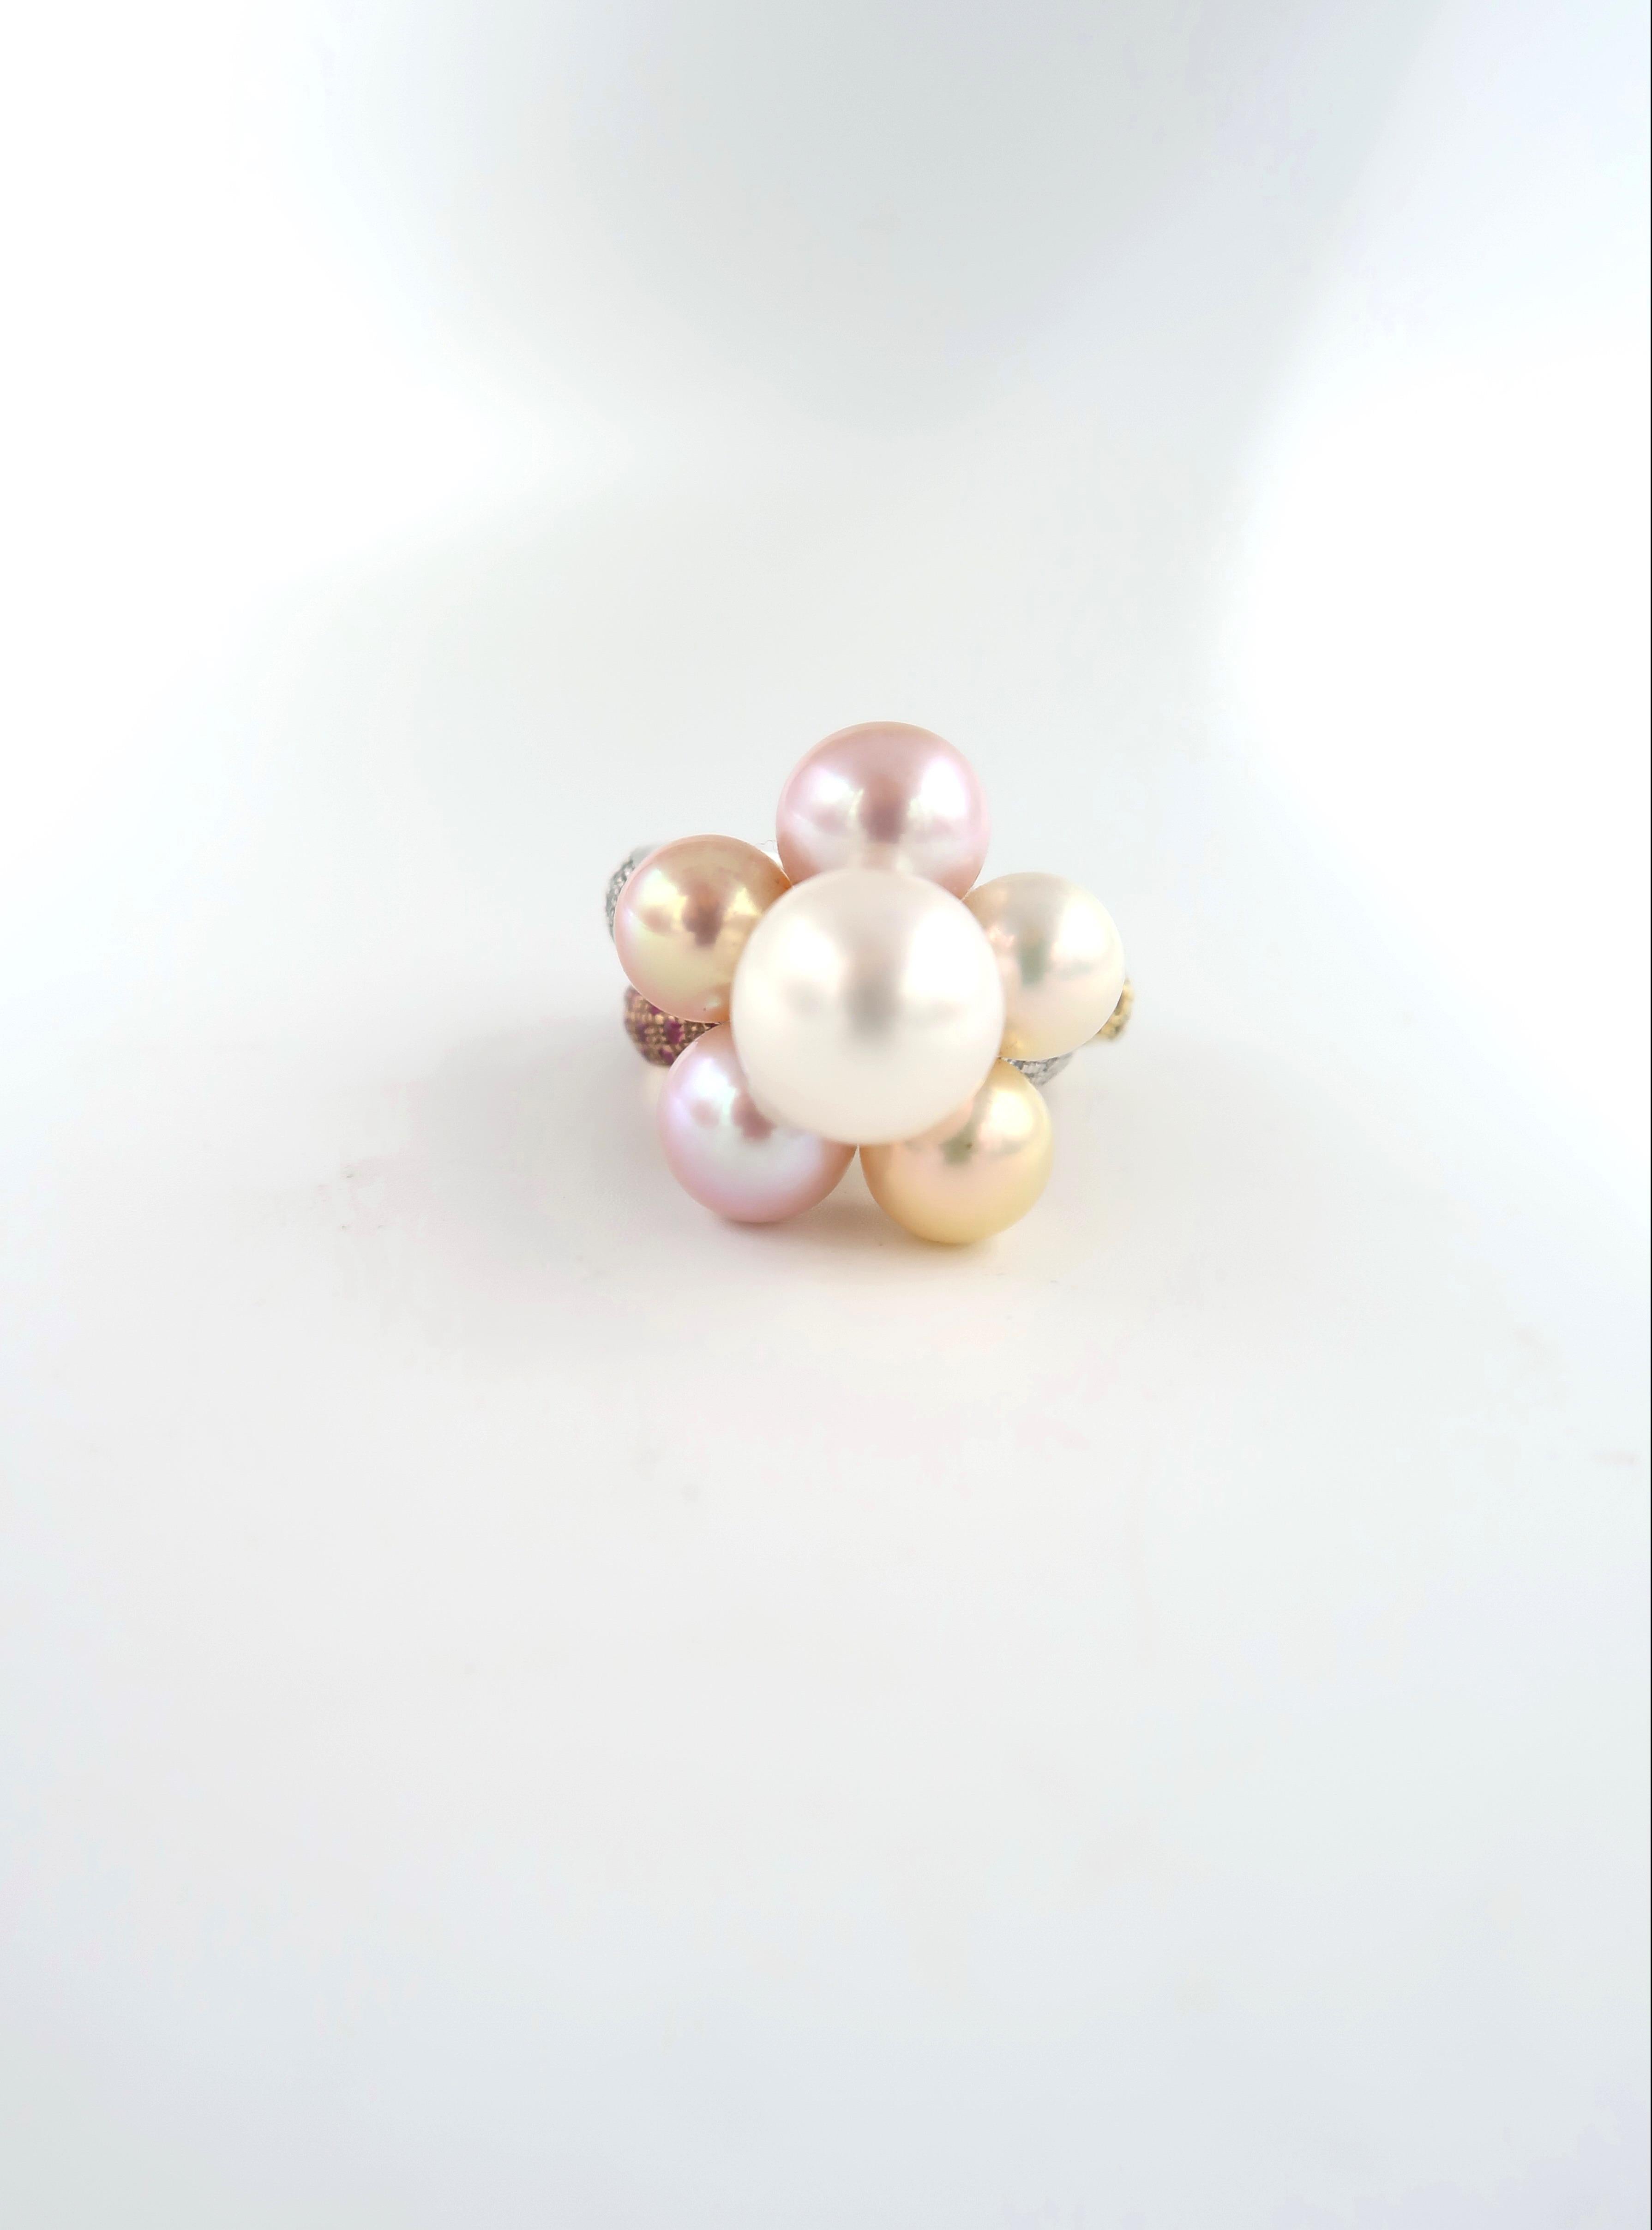 Ring Size: 55, UK N 1/2, US 7 1/4

Diamond: 0.88 ct
Pink Sapphire: 0.88 ct
Yellow Sapphire: 0.94 ct
Pearls: 6 pieces, Cultured, White with shades of pinkish and golden overtones
Gold: 18K White, Rose & Yellow Gold, 19.912 g